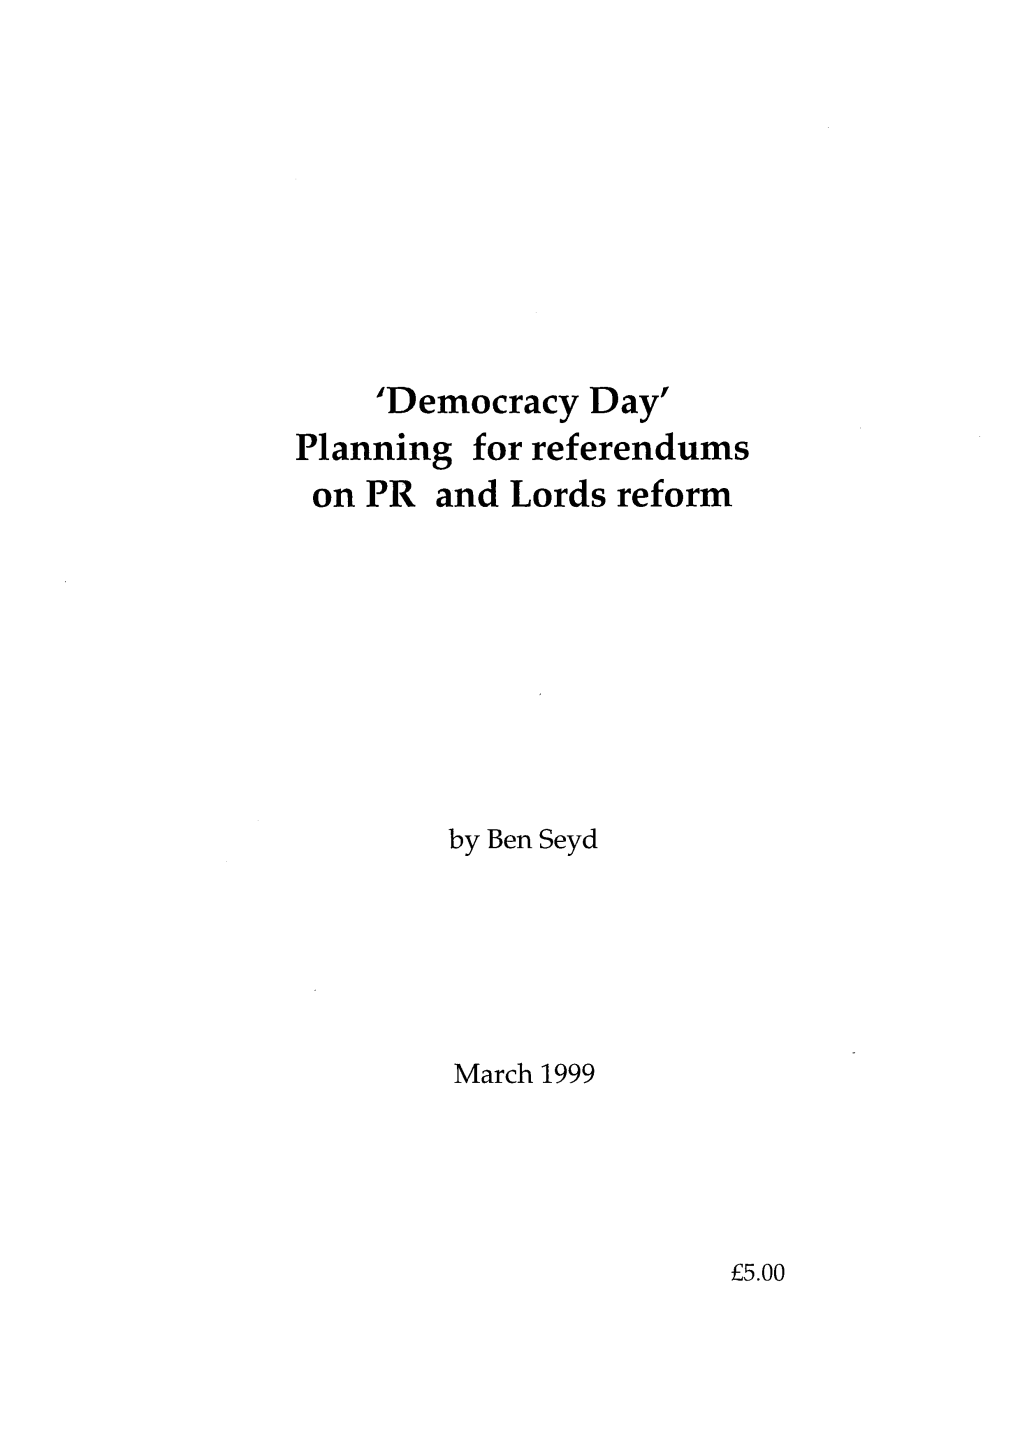 Democracy Day' Planning for Ref Erendums on PR and Lords Reform